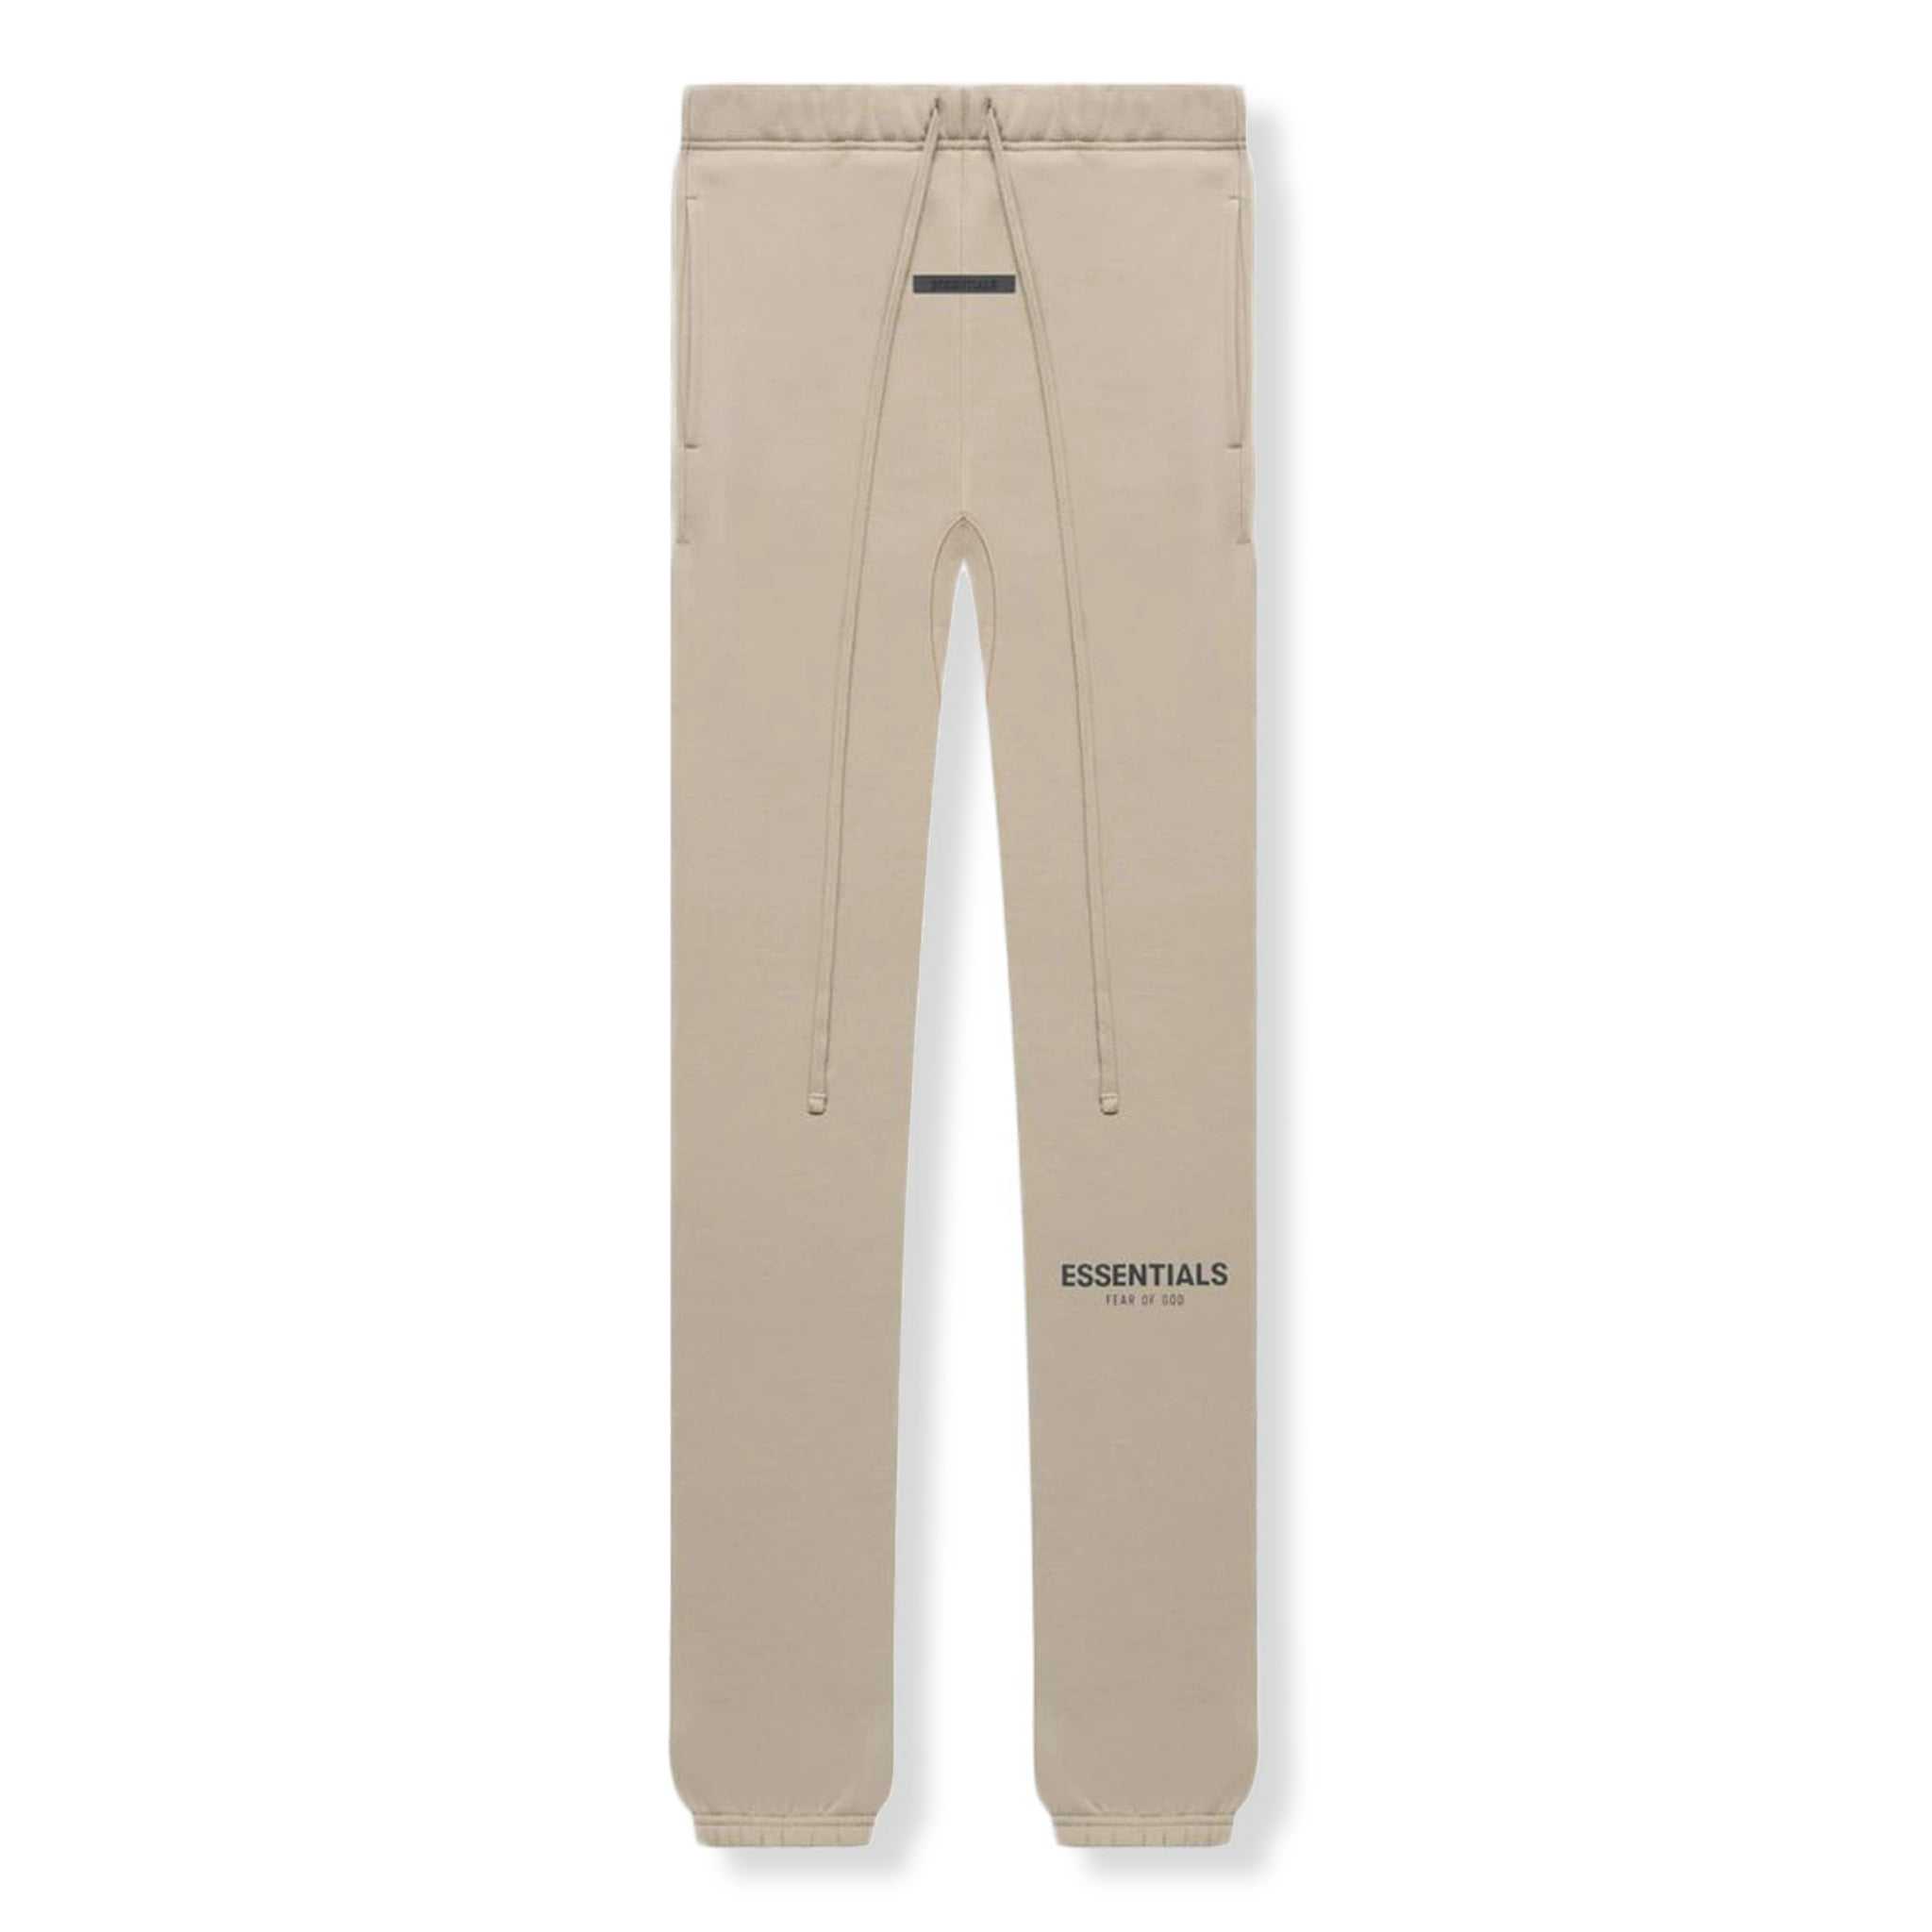 Image of Fear Of God Essentials Core Collection String Tan Sweatpants